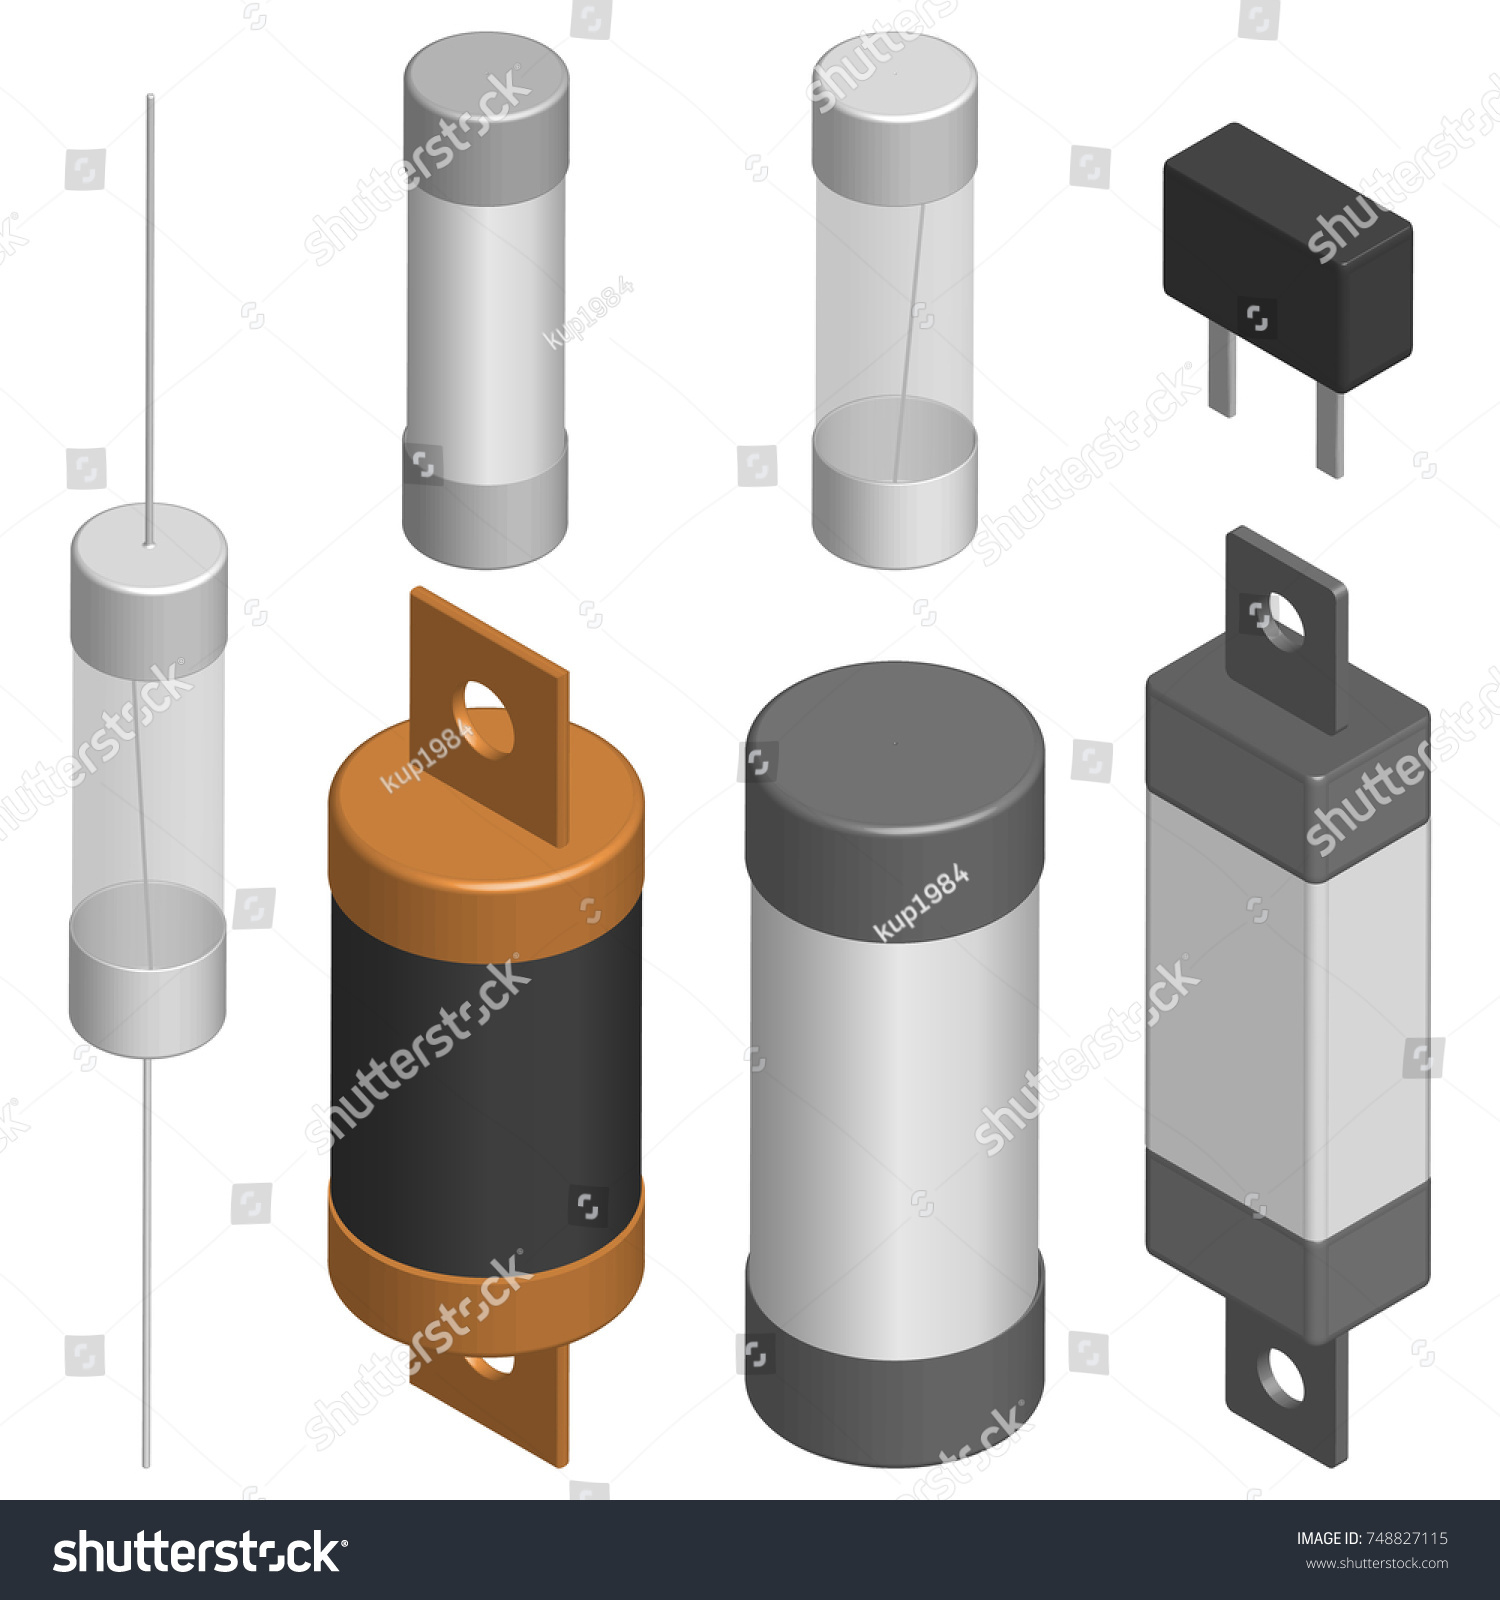 SVG of Set of fuses of different shapes isolated on white background. Elements design of electronic components. 3D isometric style, vector illustration. svg